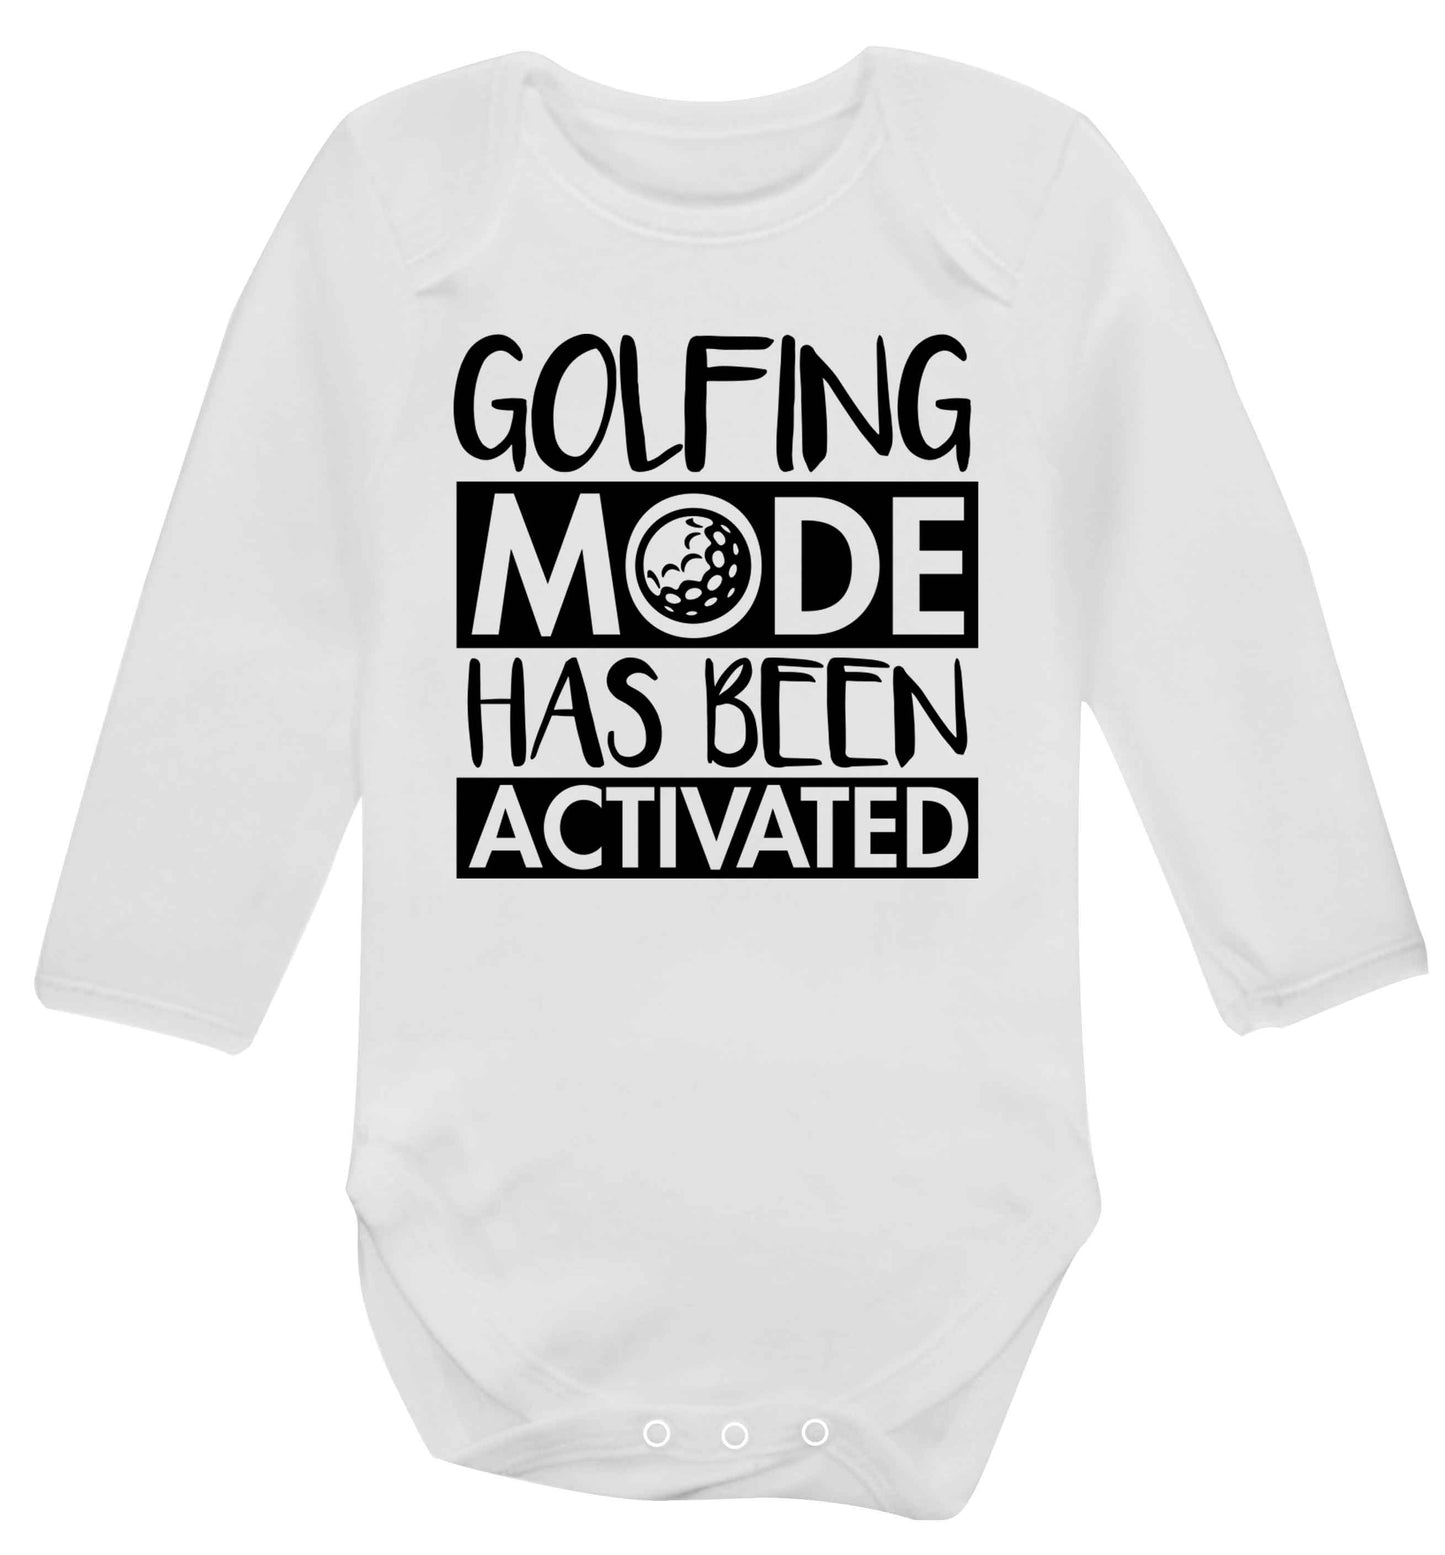 Golfing mode has been activated Baby Vest long sleeved white 6-12 months